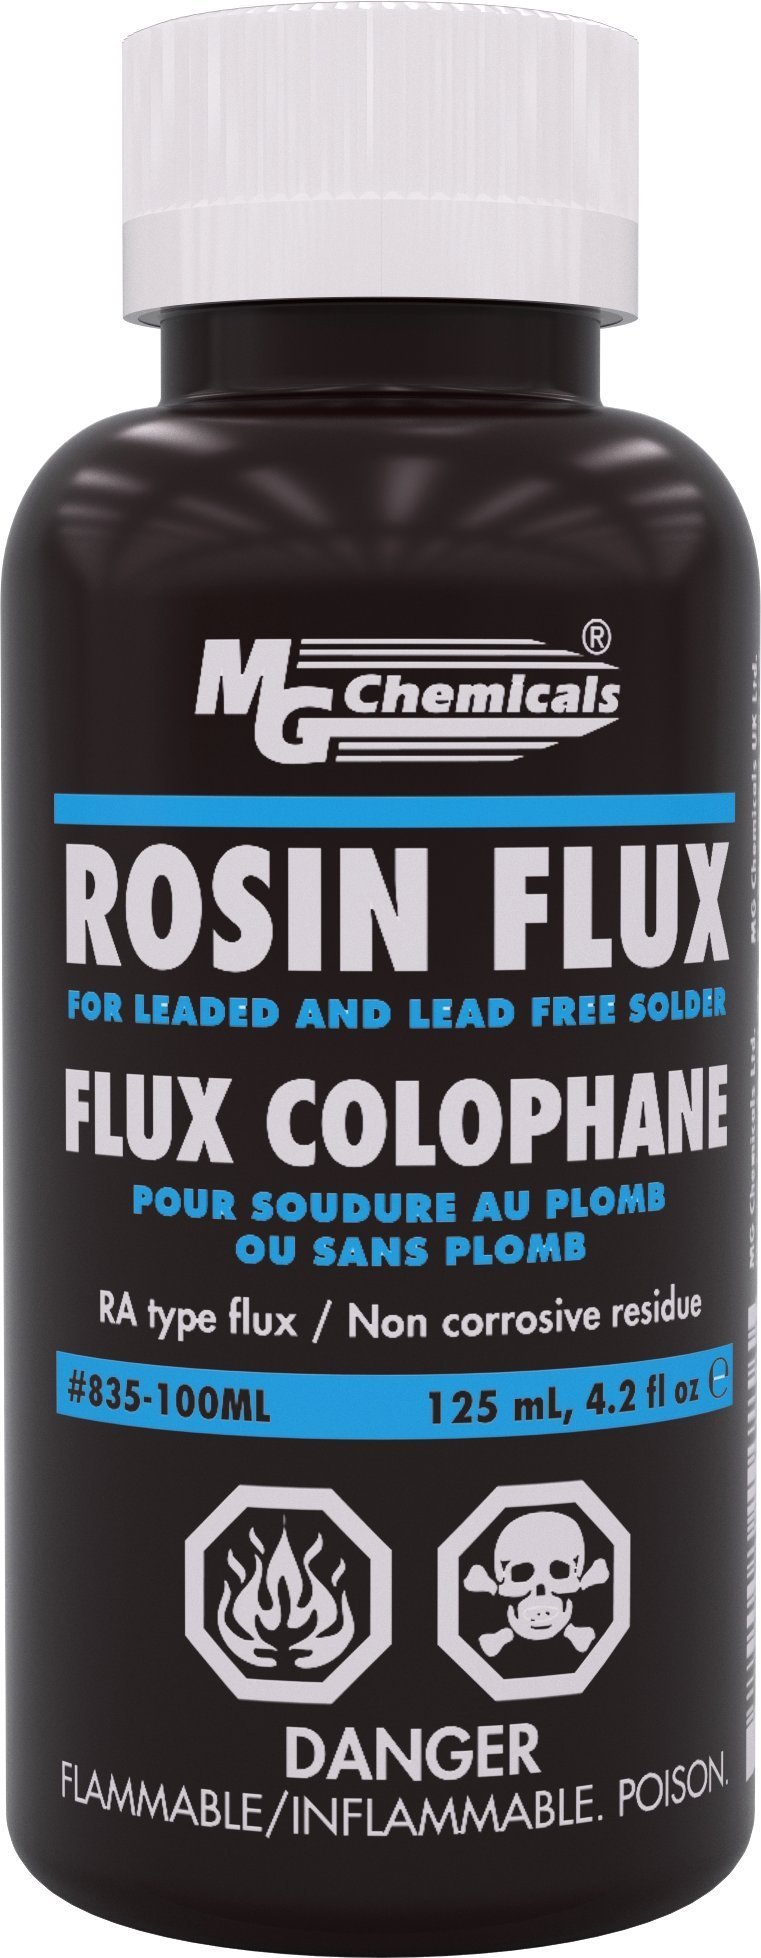 8oz Liquid Zinc Flux for Stained Glass, Soldering Work, Glass